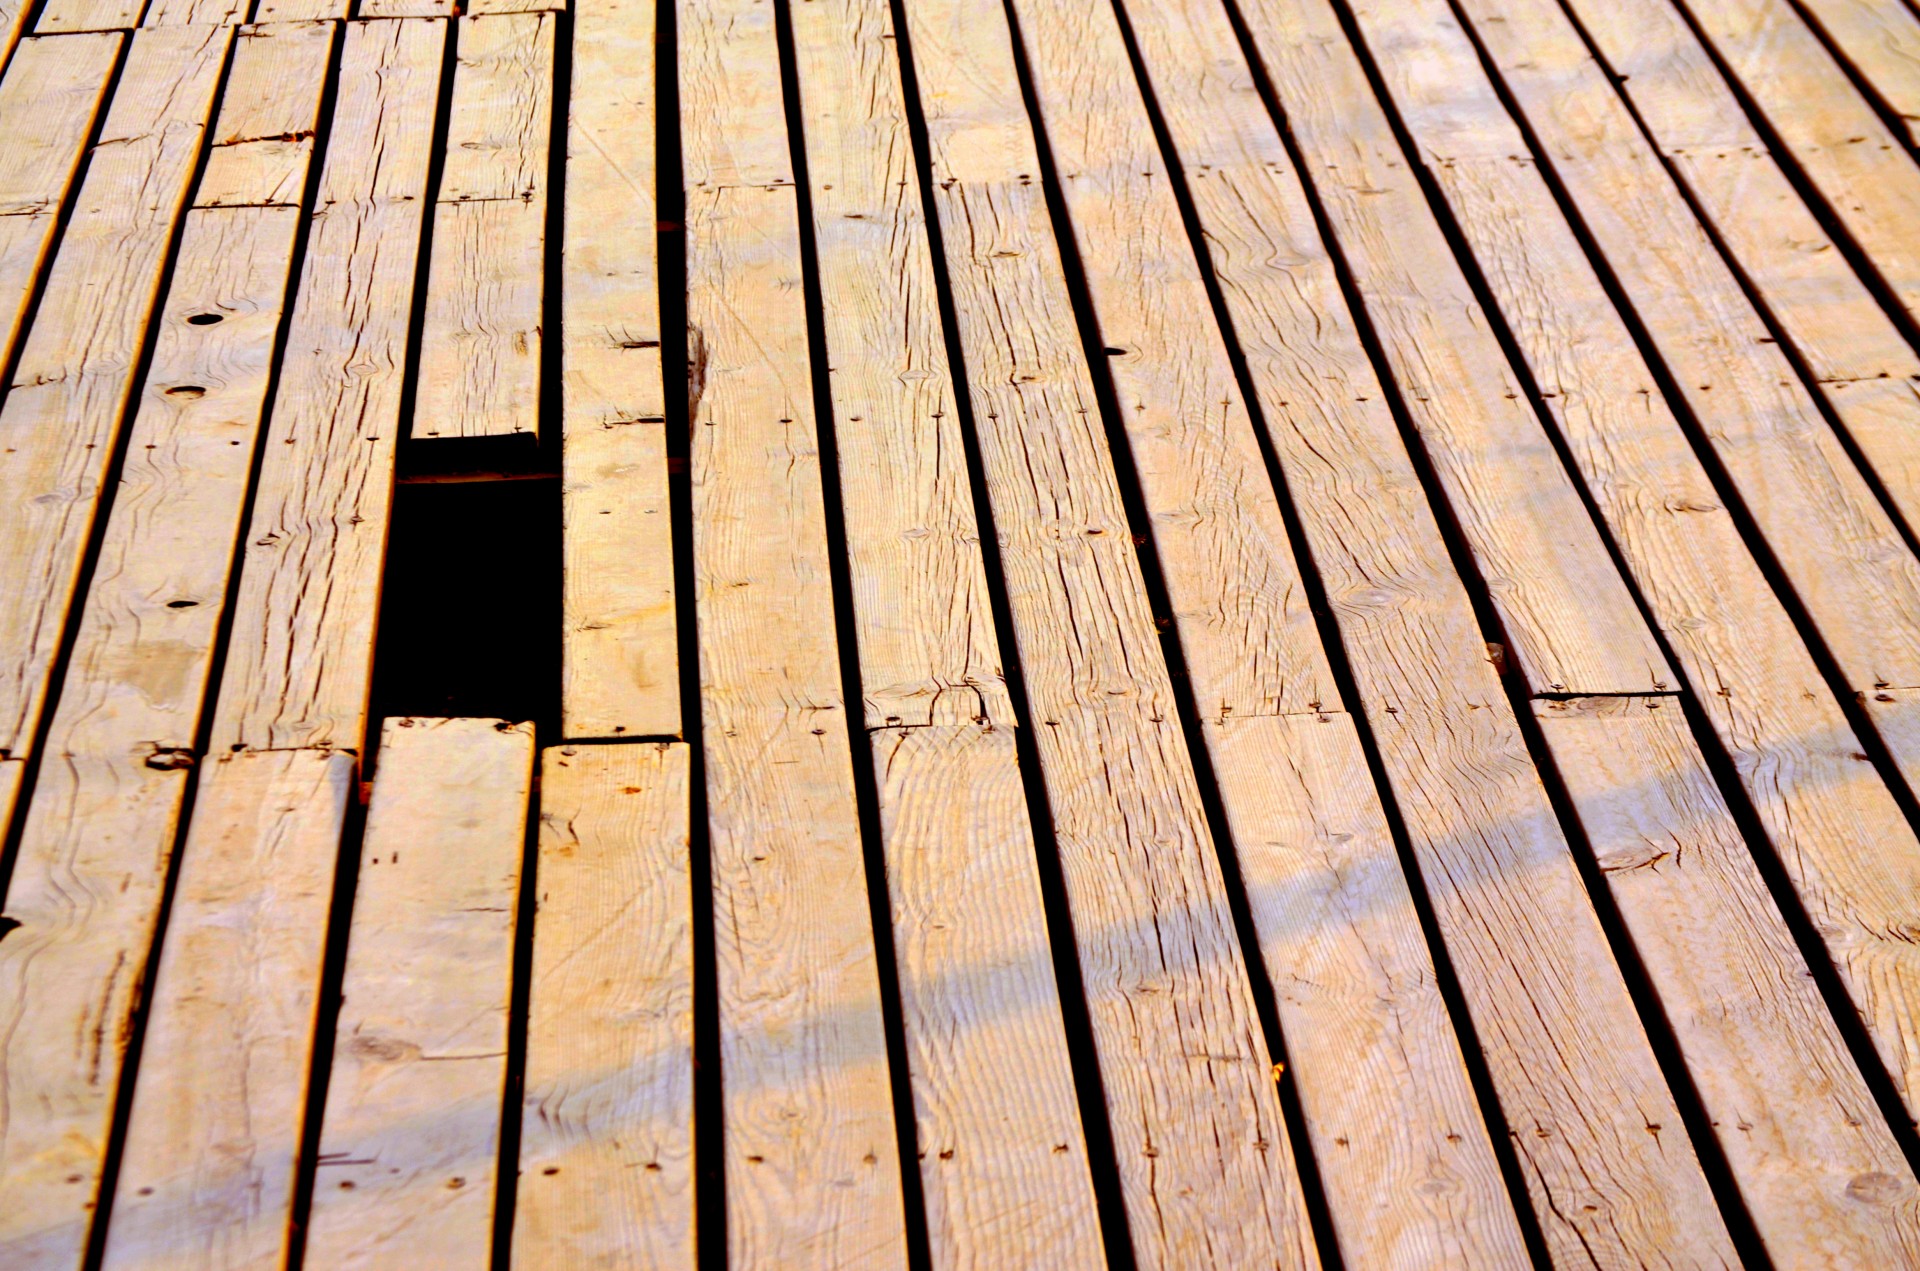 A small hole on a deck